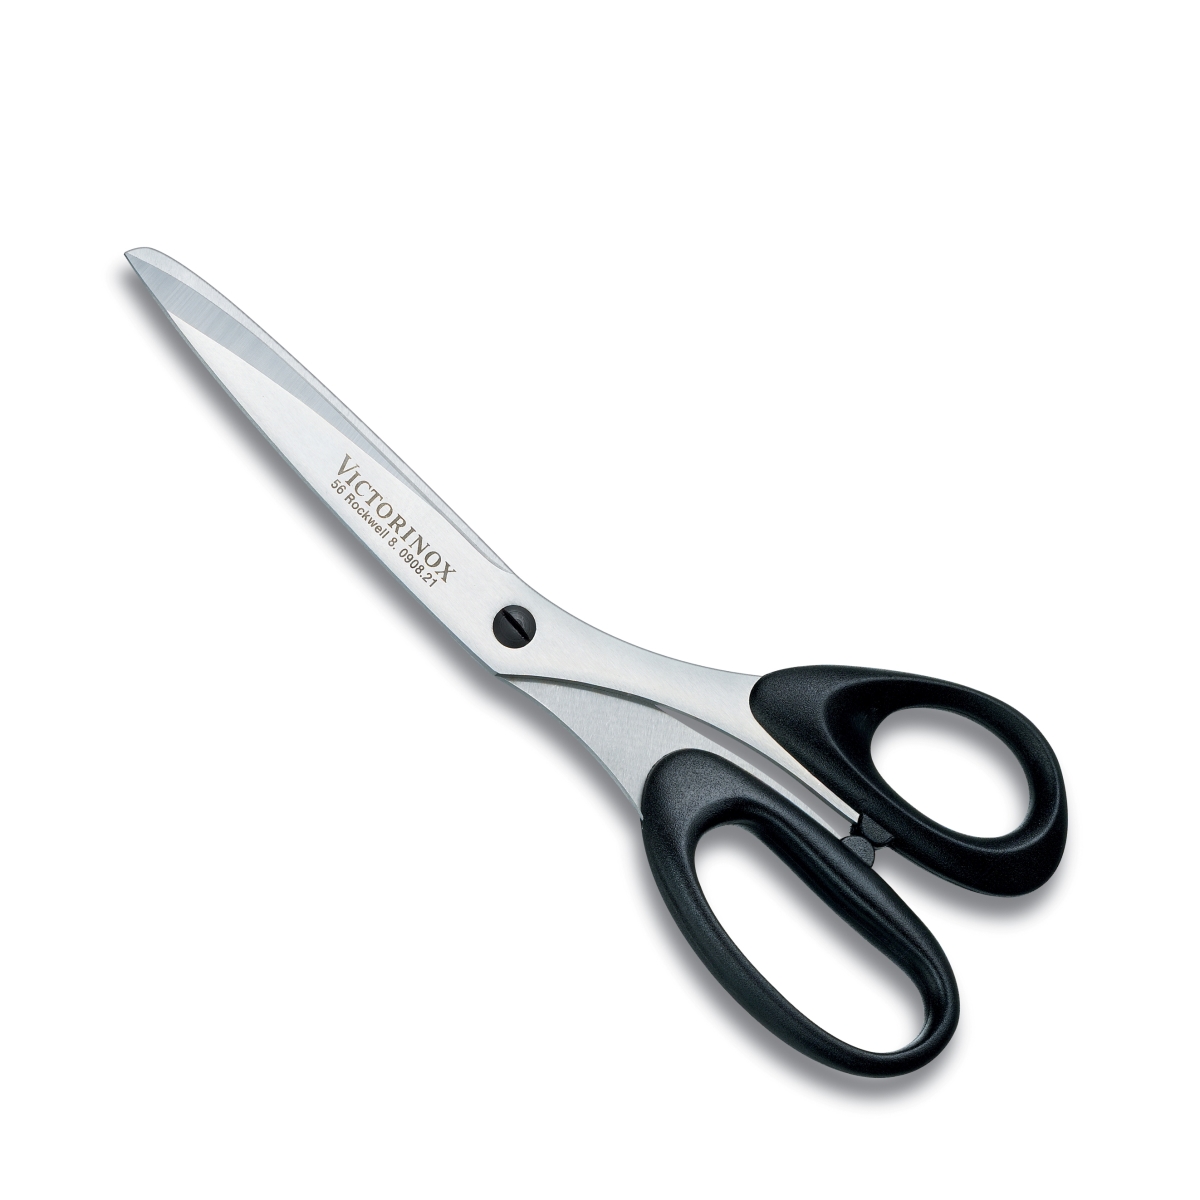 Swiss Army Brands Vic-87779 2019 Victorinox Stainless Steel Bent Kitchen Scissors & Shears, Black - 8 In.